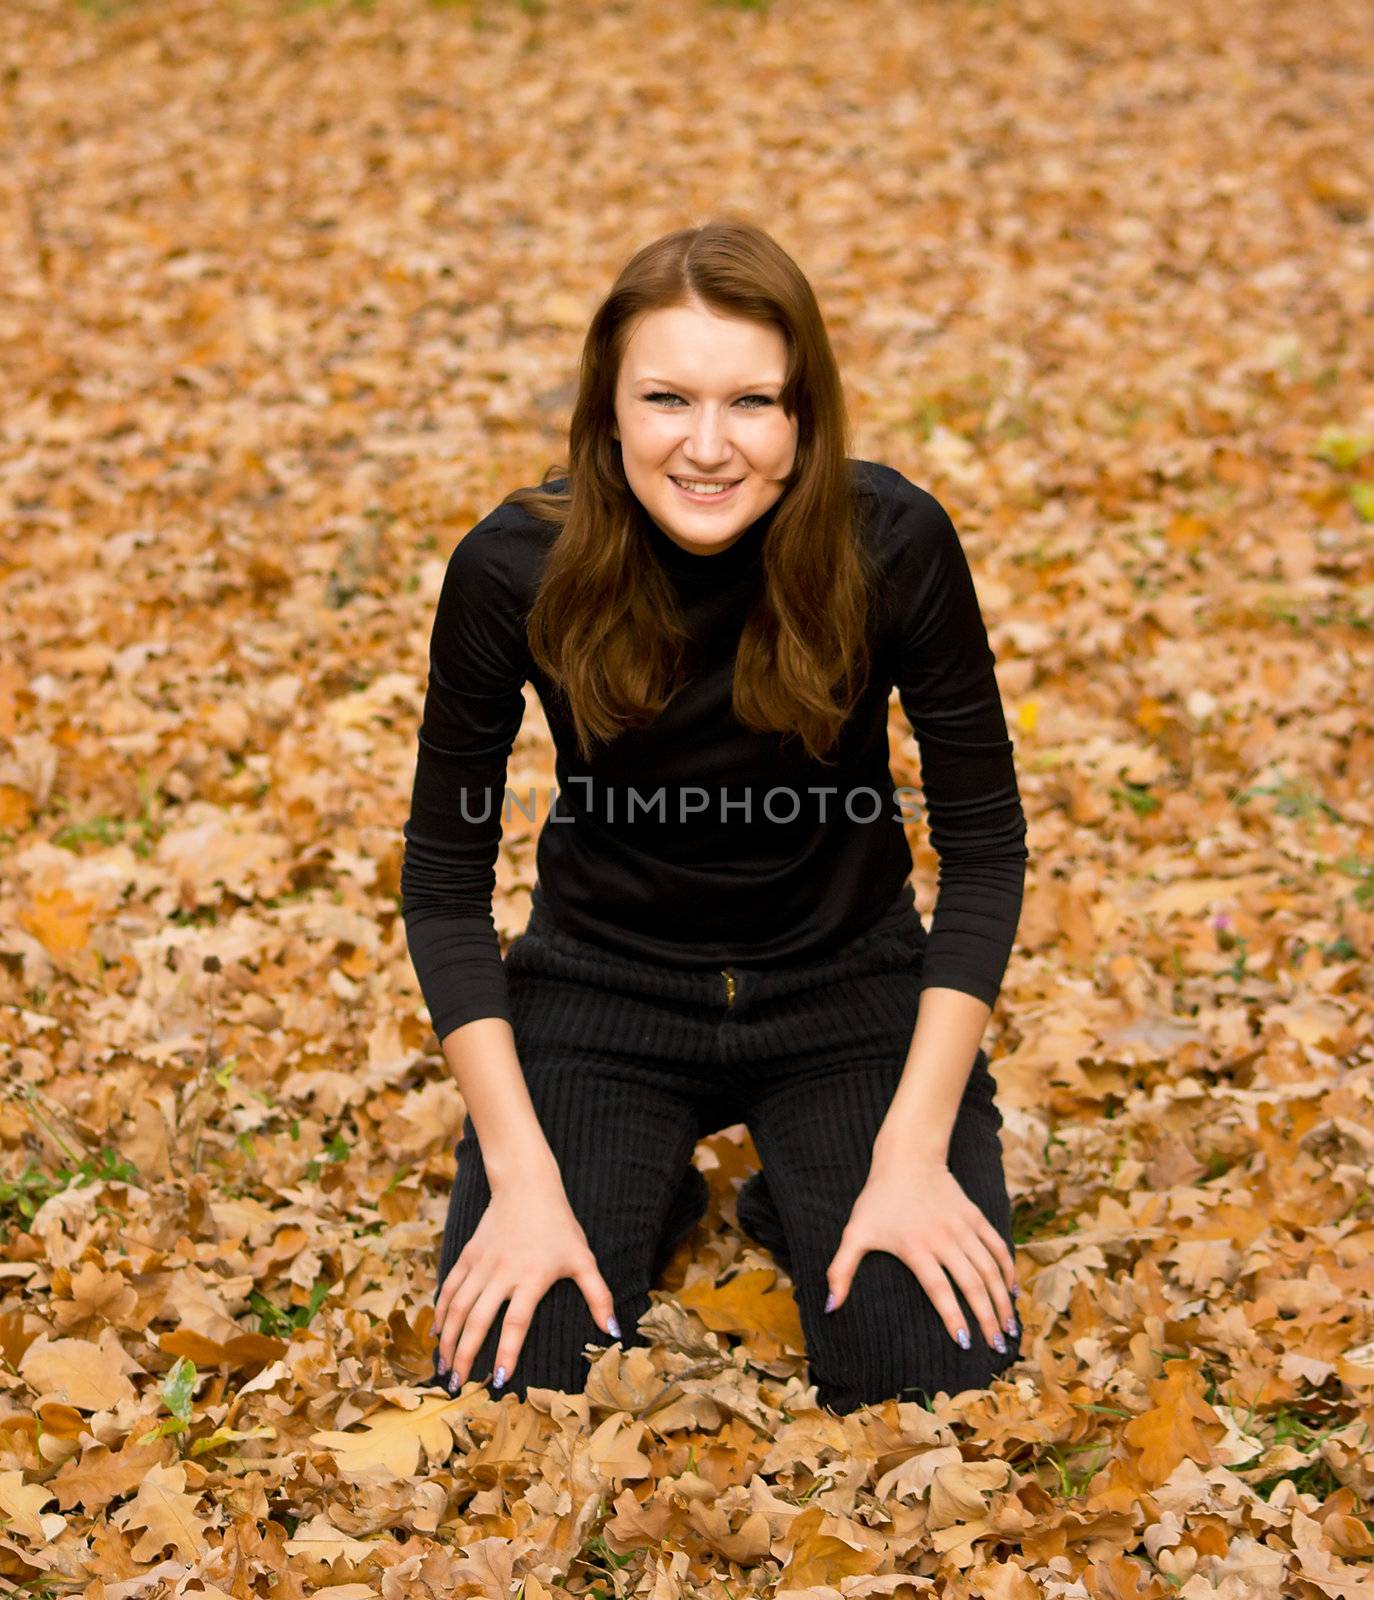 The young girl against autumn nature